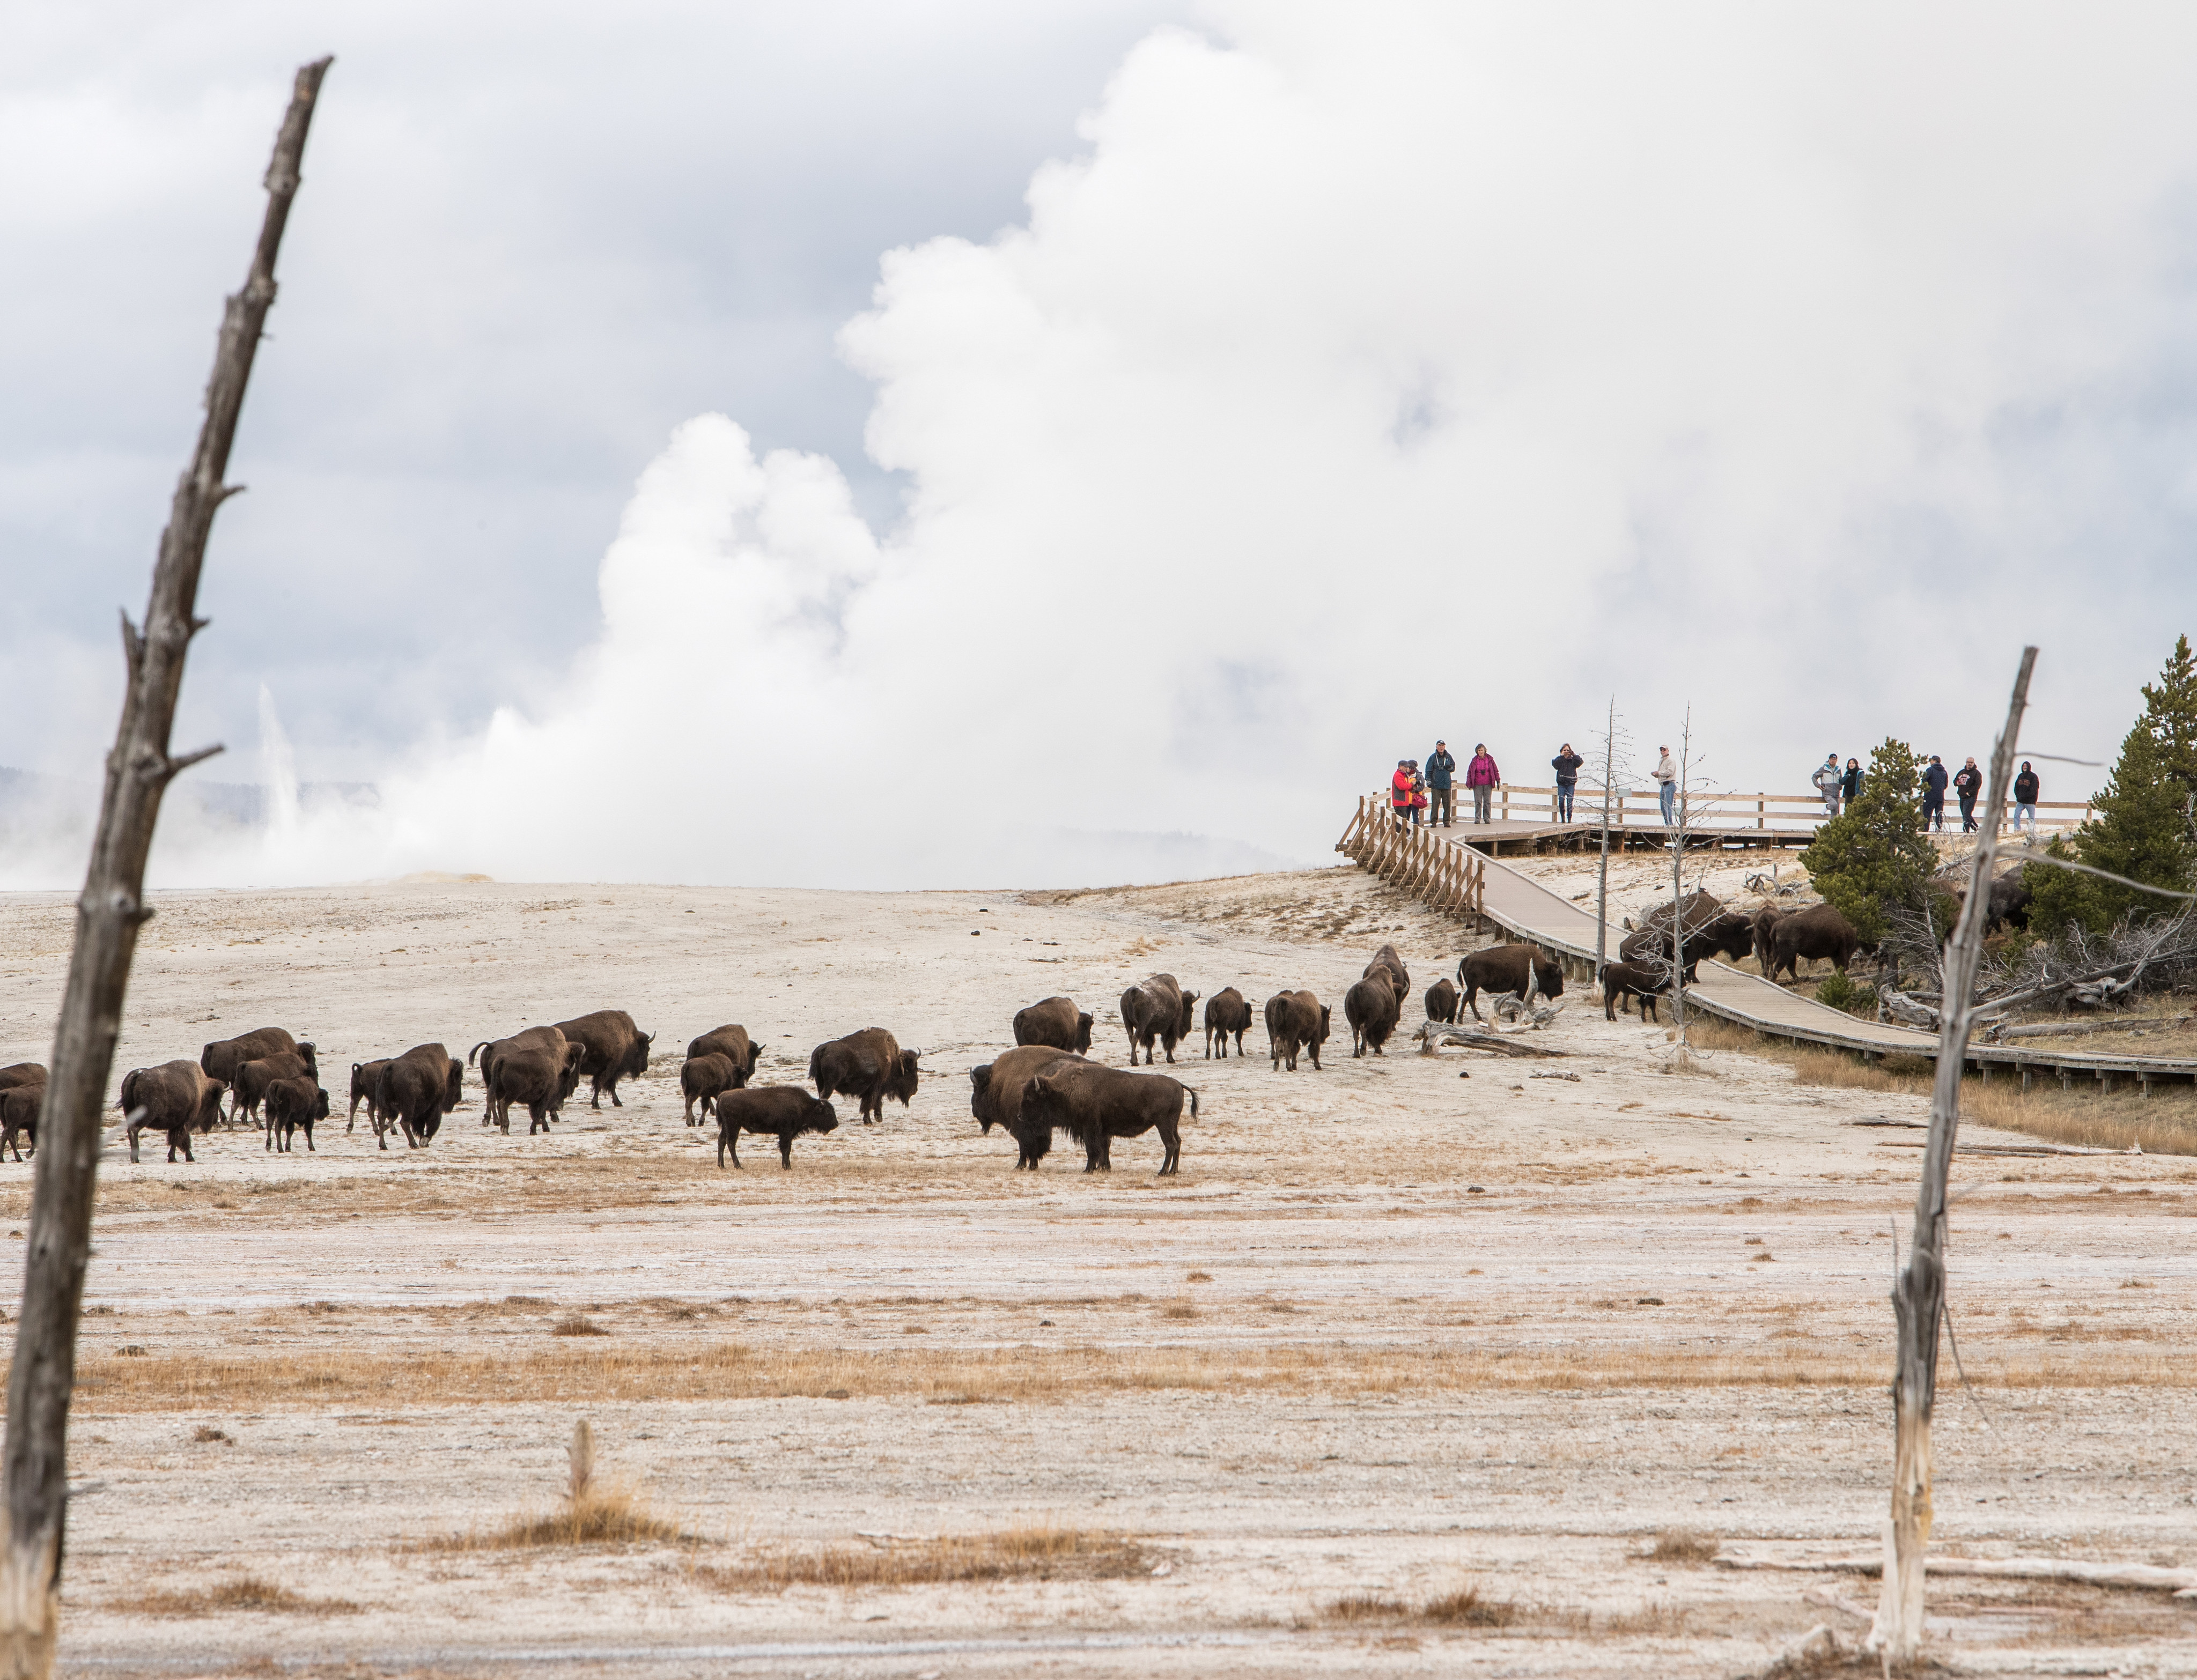 a small herd of bison standing near a thermal area and on a boardwalk as people watch